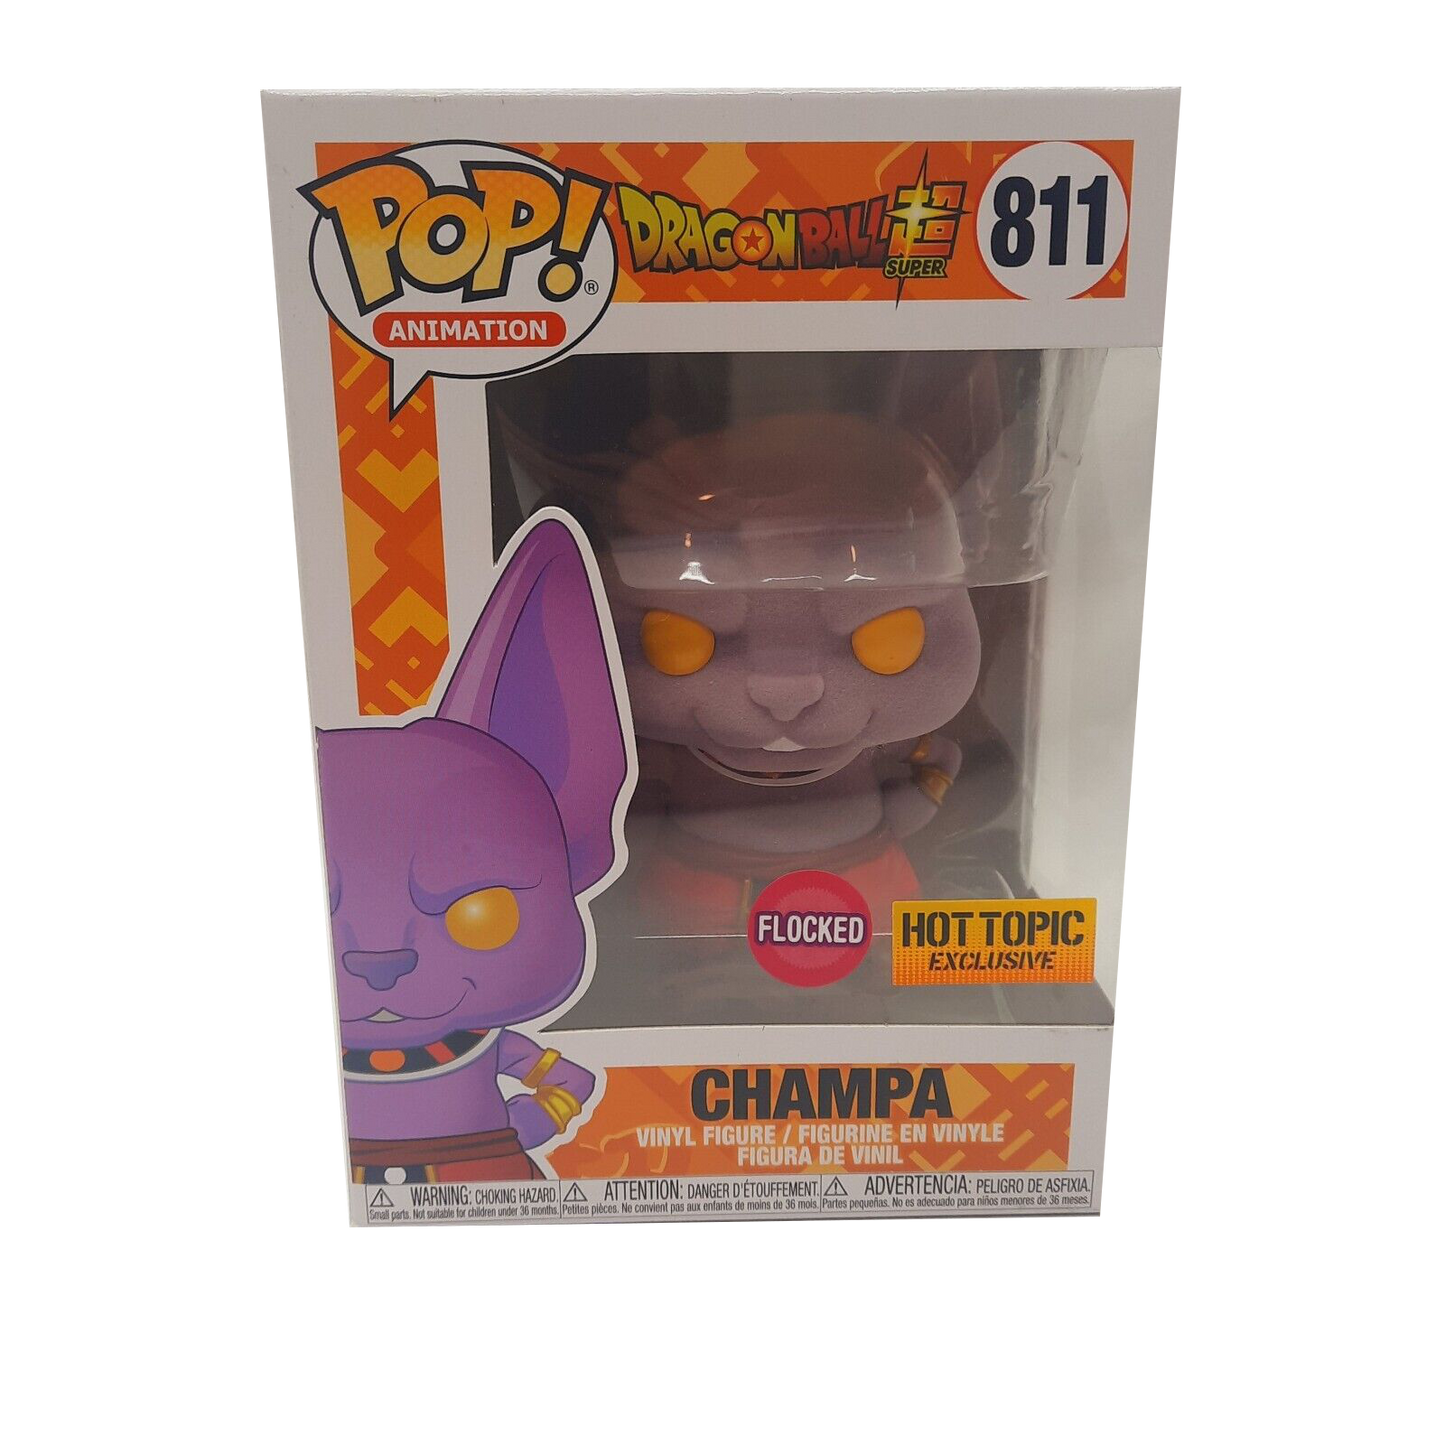 Funko - POP! Animation - Dragon Ball Super - Champa - Flocked - Hot topic Exclusive #811